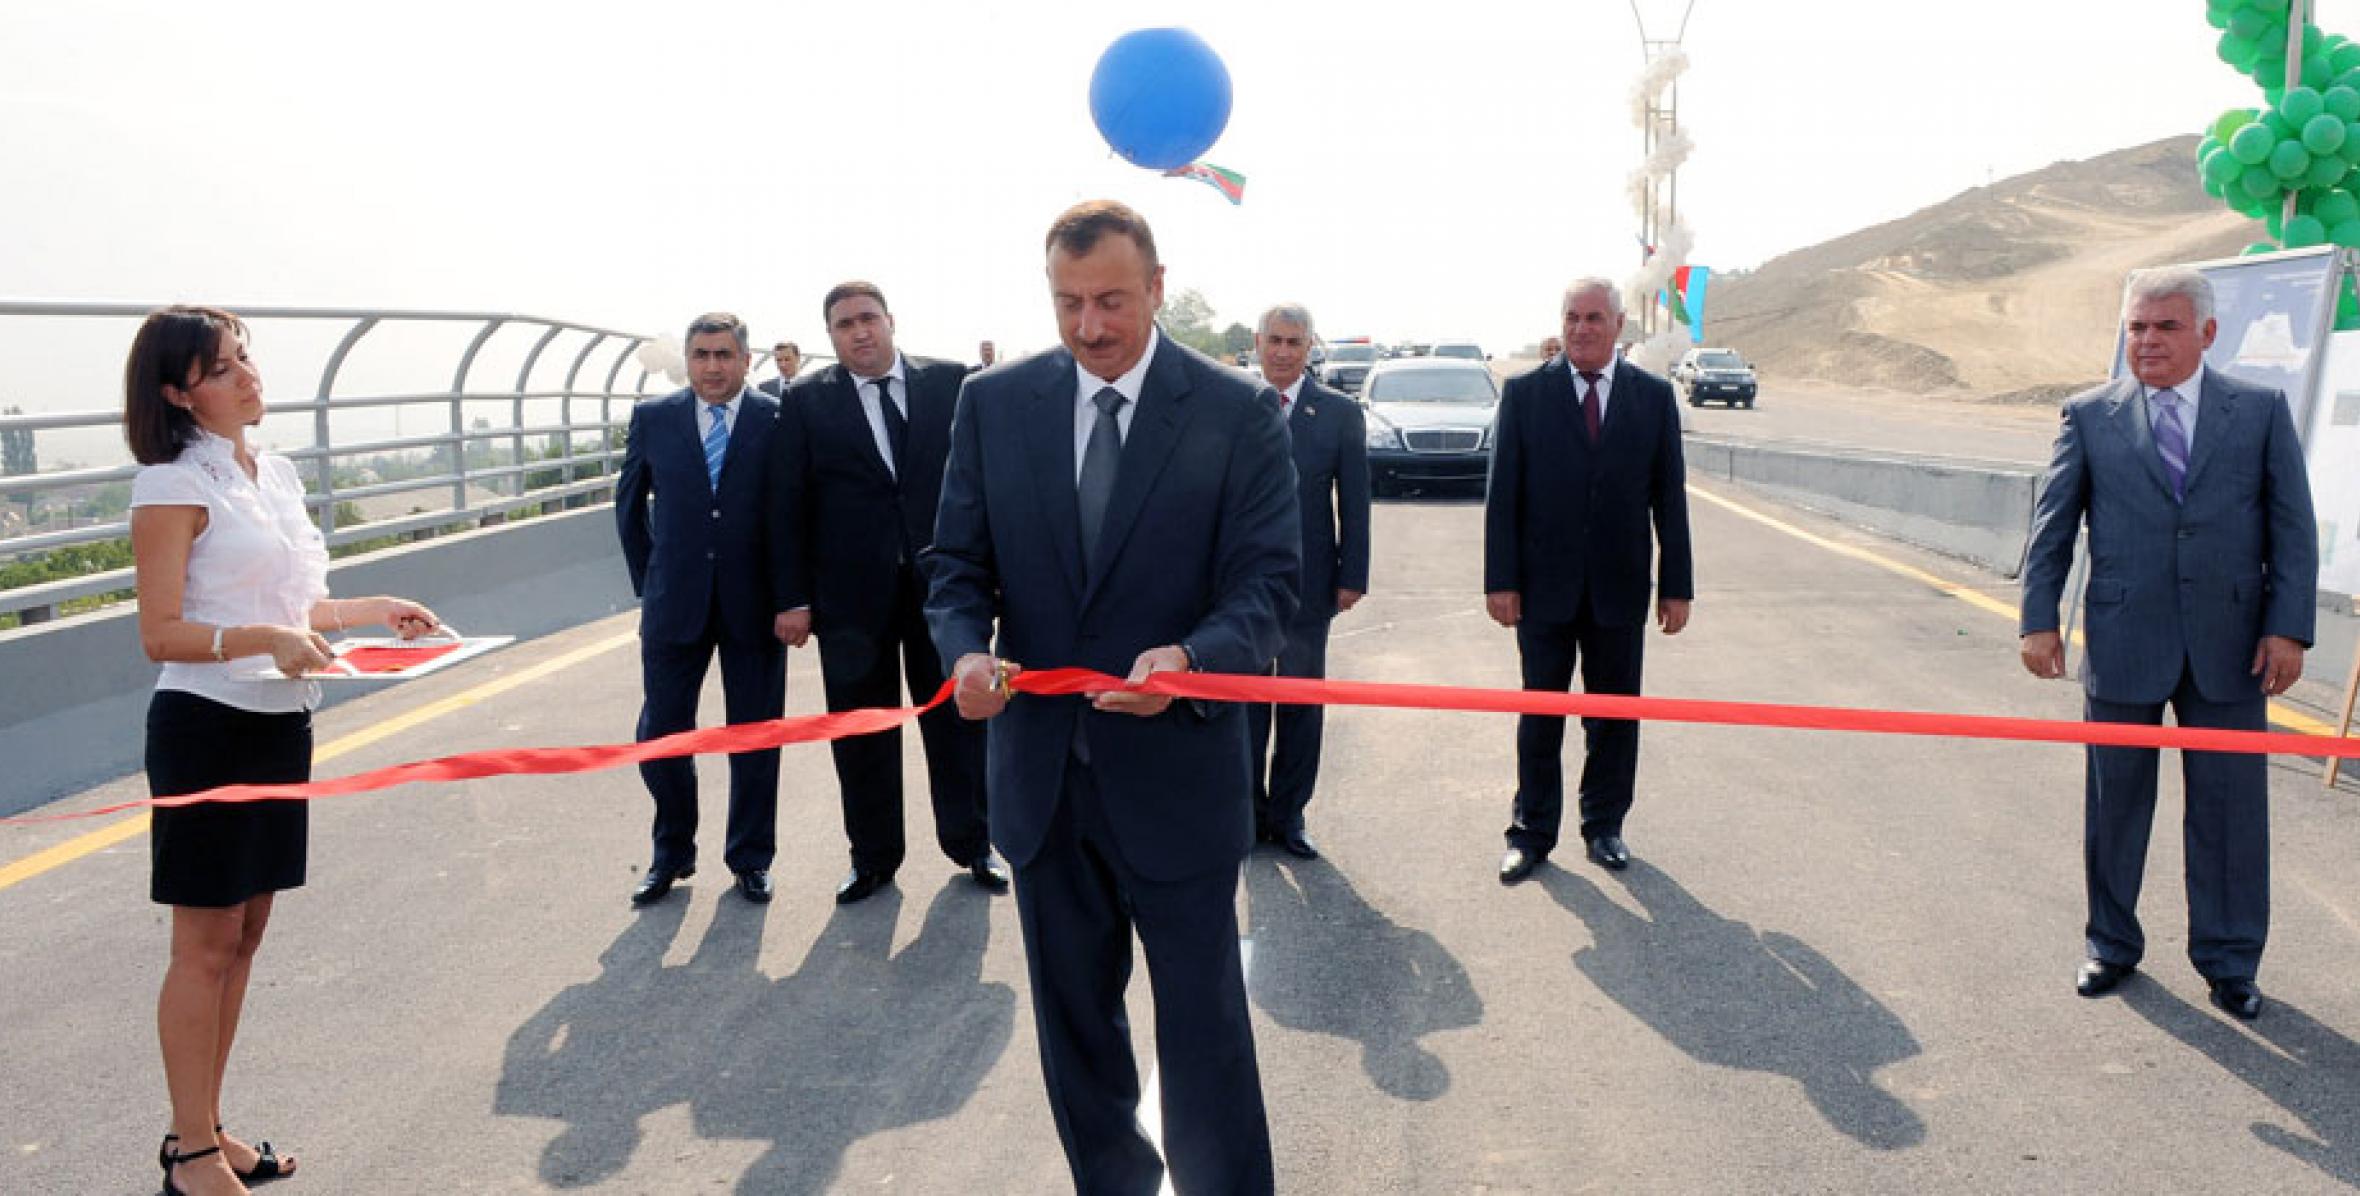 Ilham Aliyev took part in the opening of the Shabran encircling highway and the bridge compound